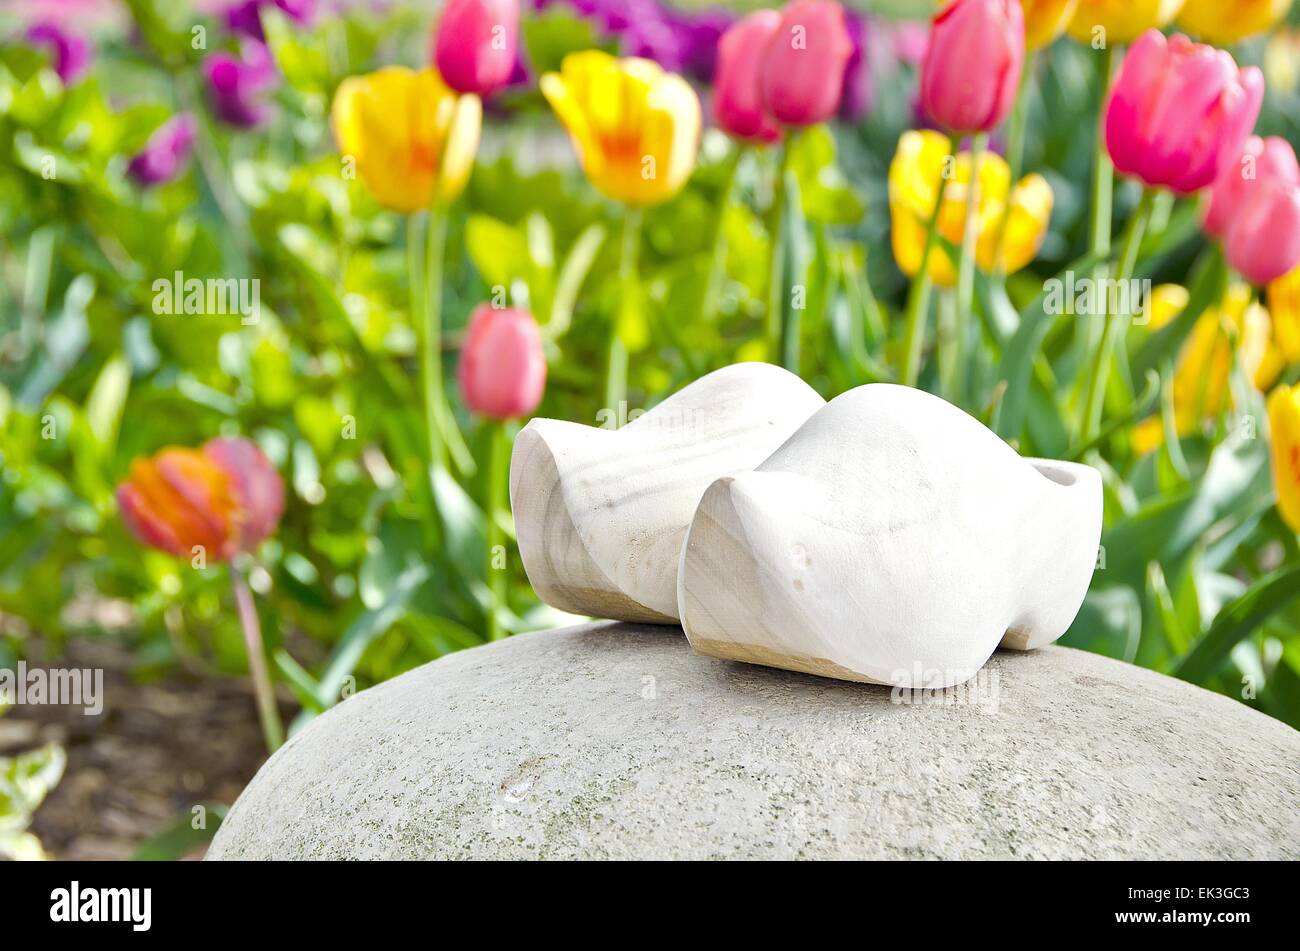 Wooden shoes on a rock in a Dutch tulip garden. Stock Photo